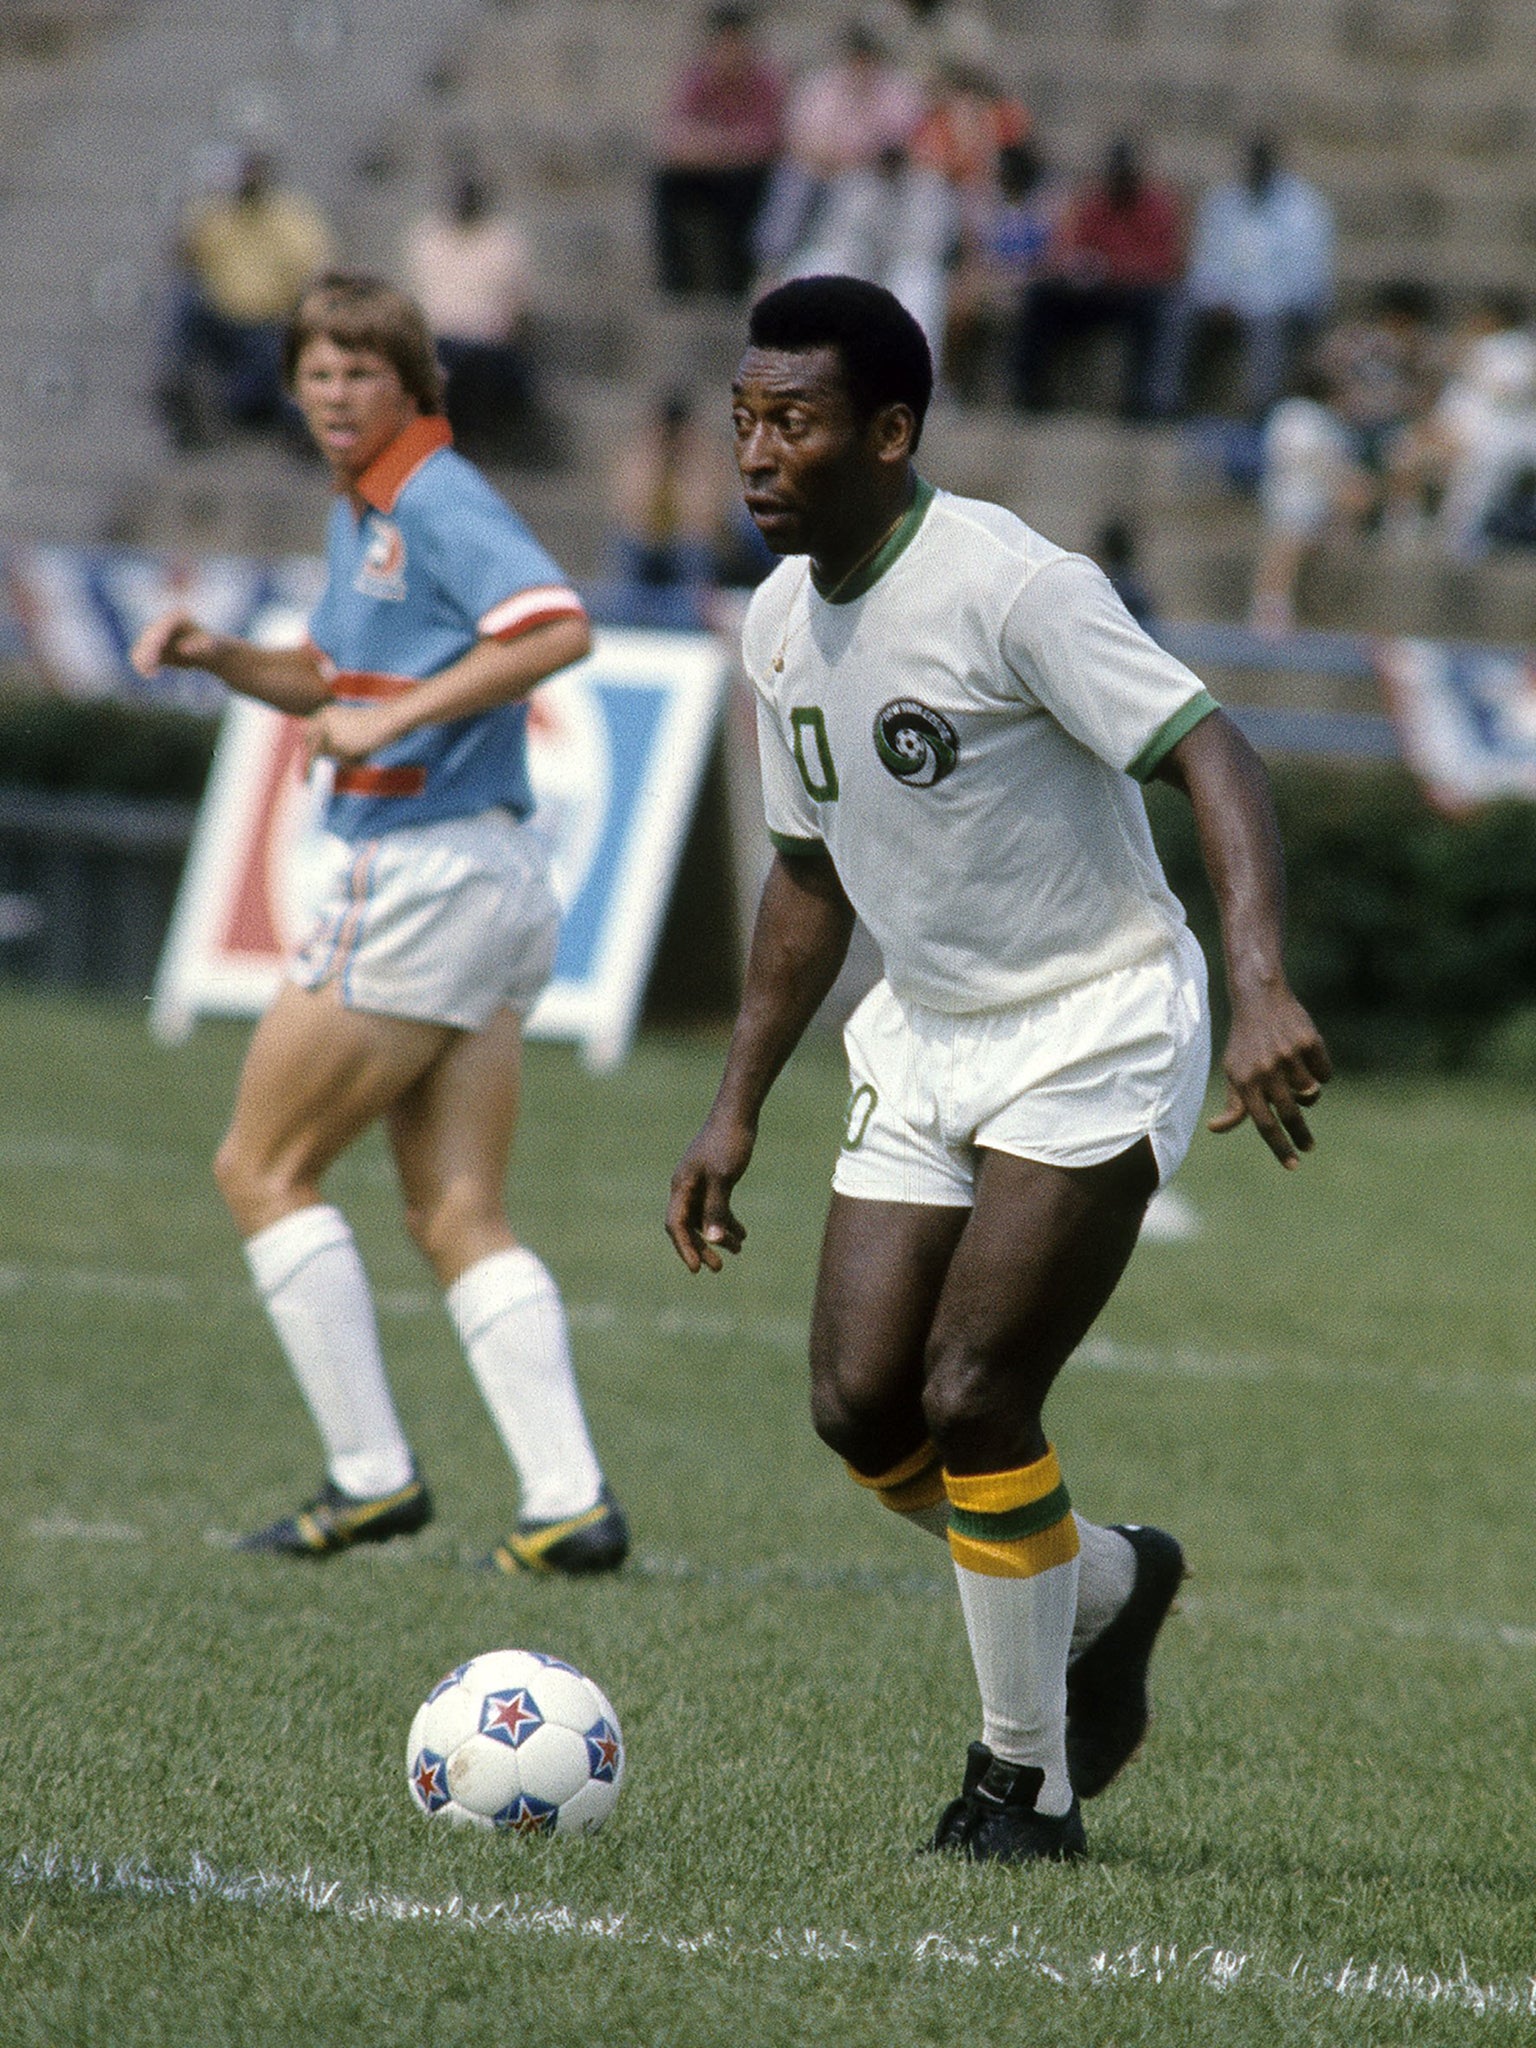 The Brazilian played for New York Cosmos from 1975-77